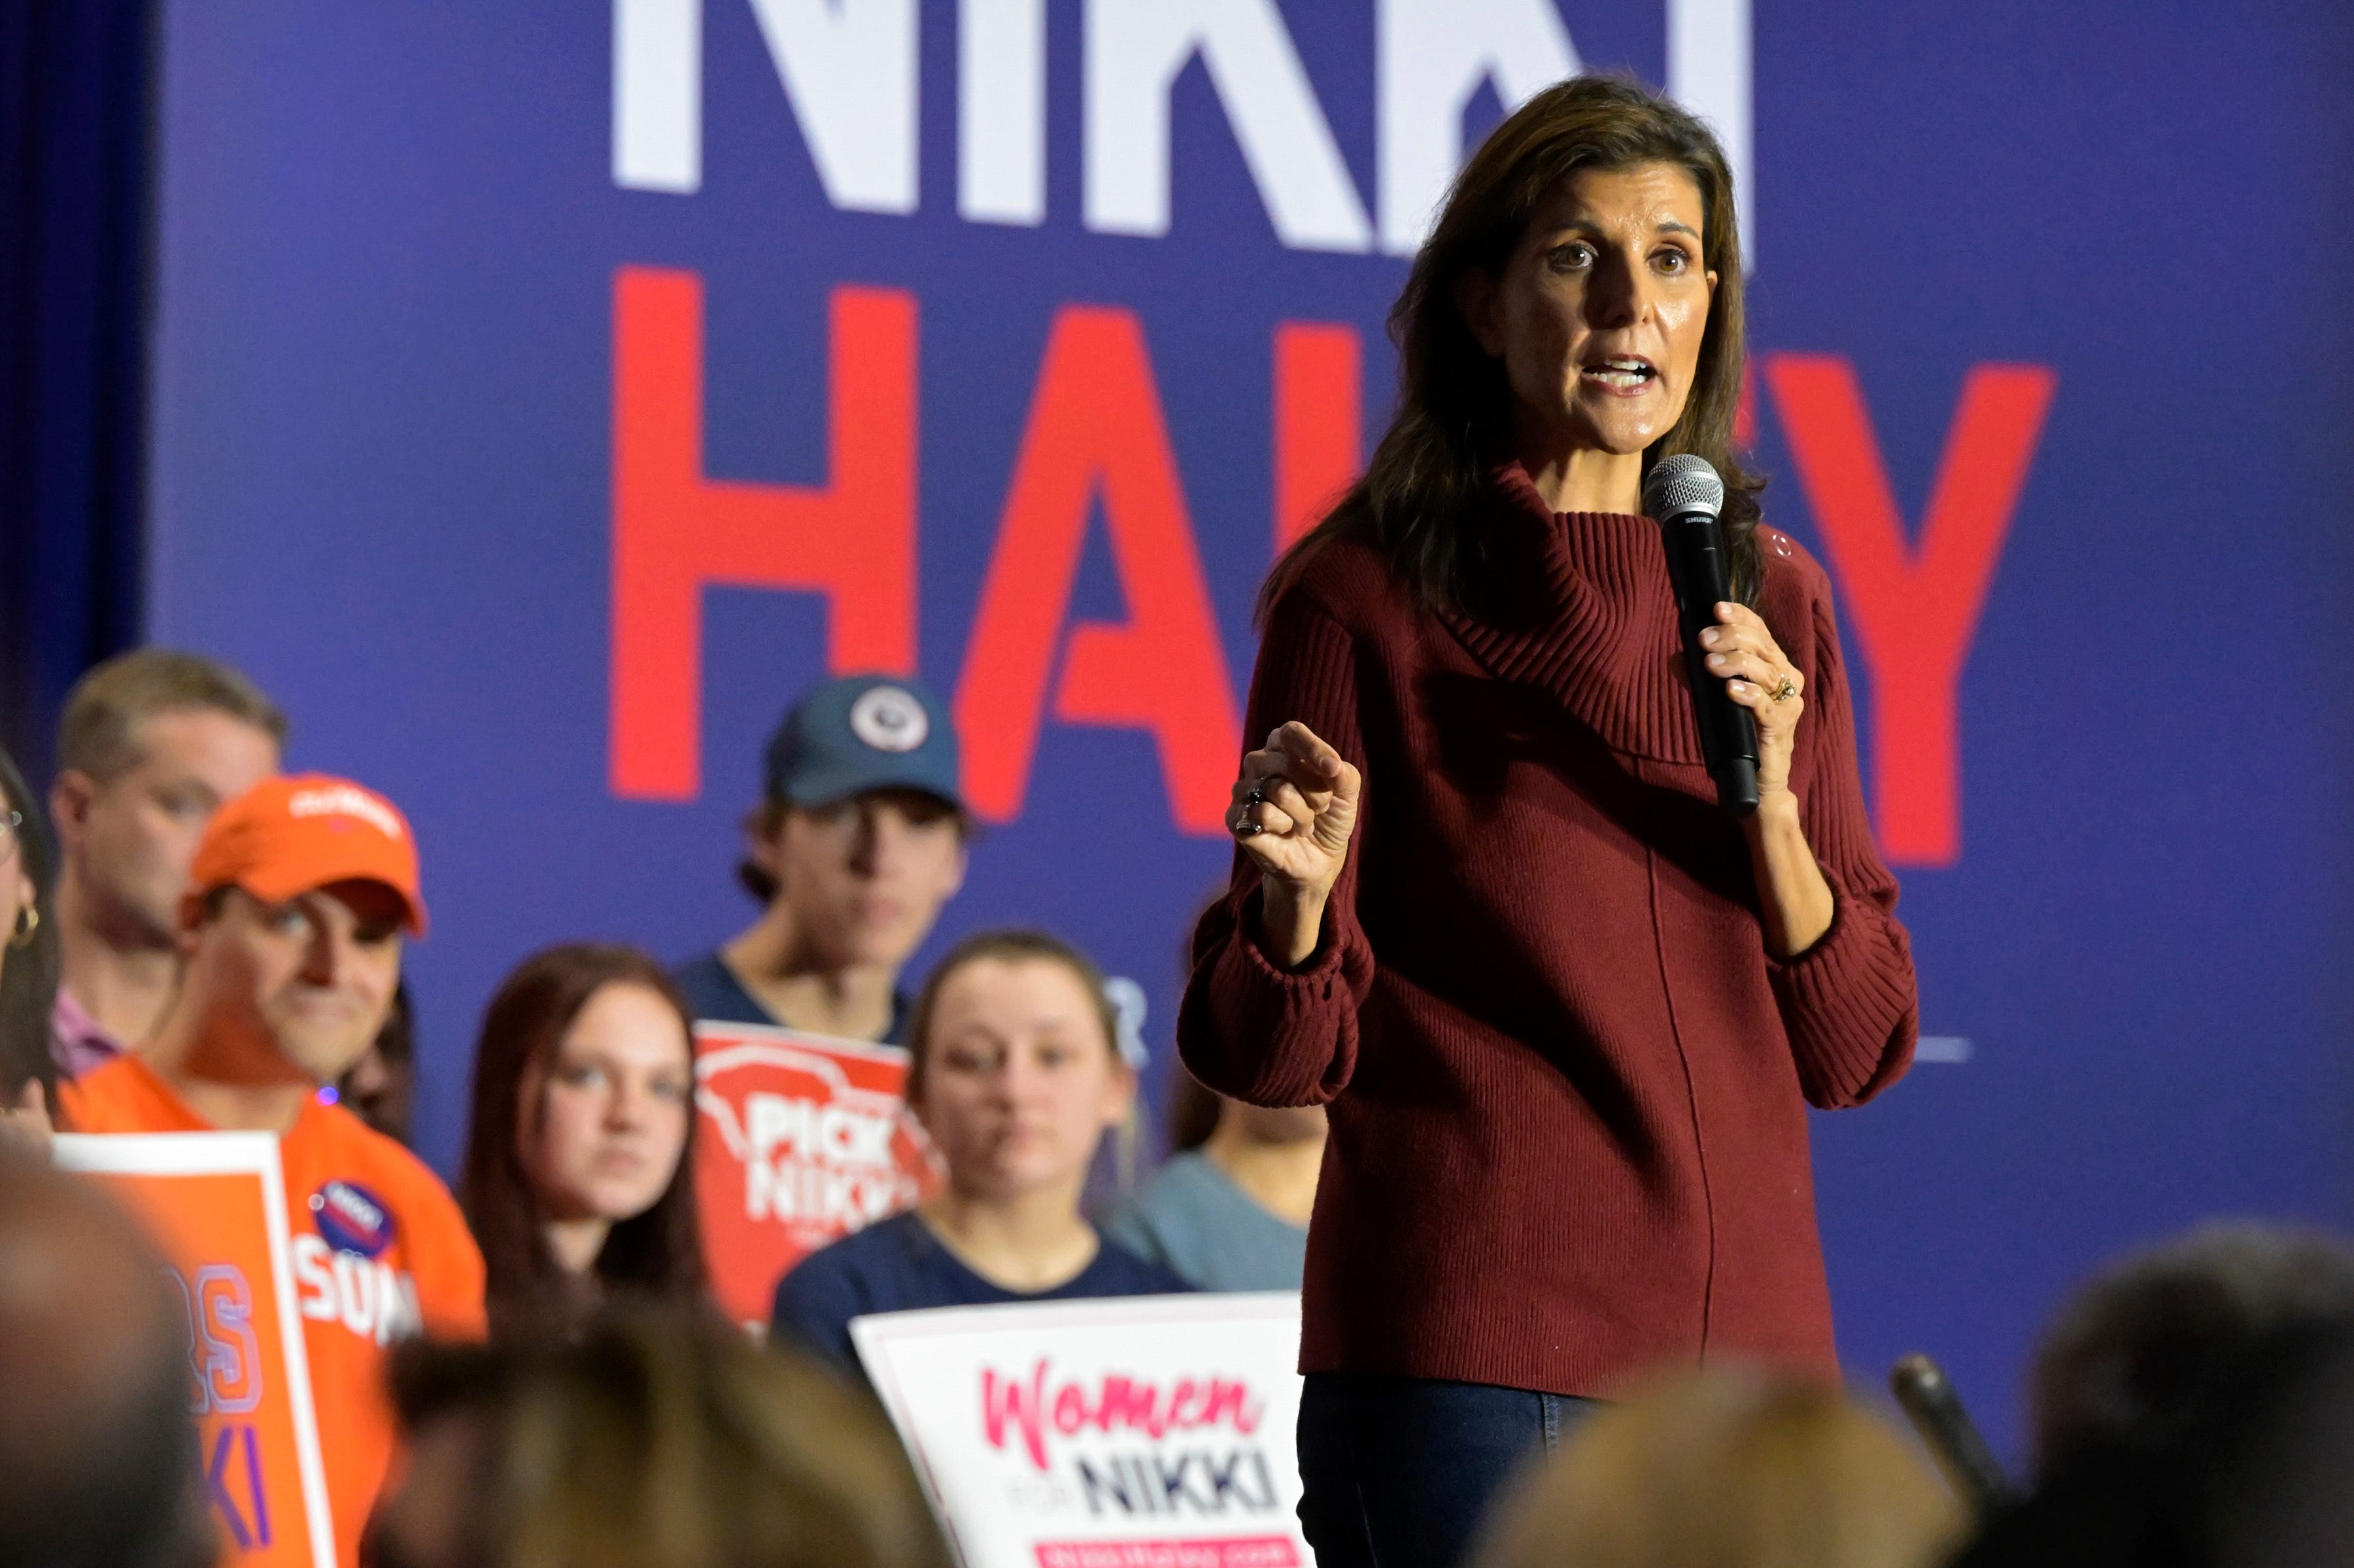 nikki haley hits donald trump over comments about veterans days after he attacked her husband